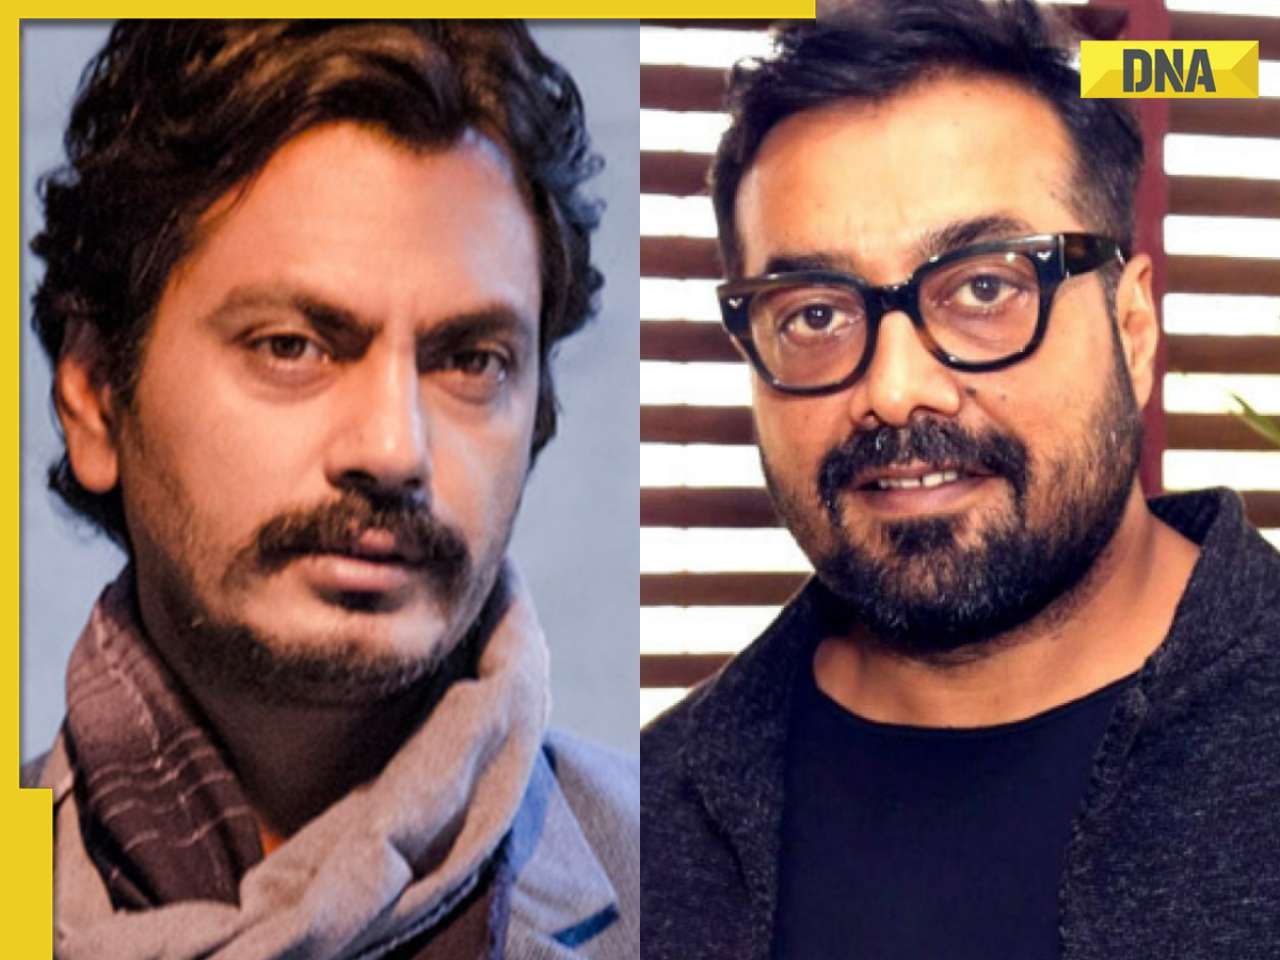 Nawazuddin Siddiqui says he is not friends with Anurag Kashyap: 'We don't talk much but...'